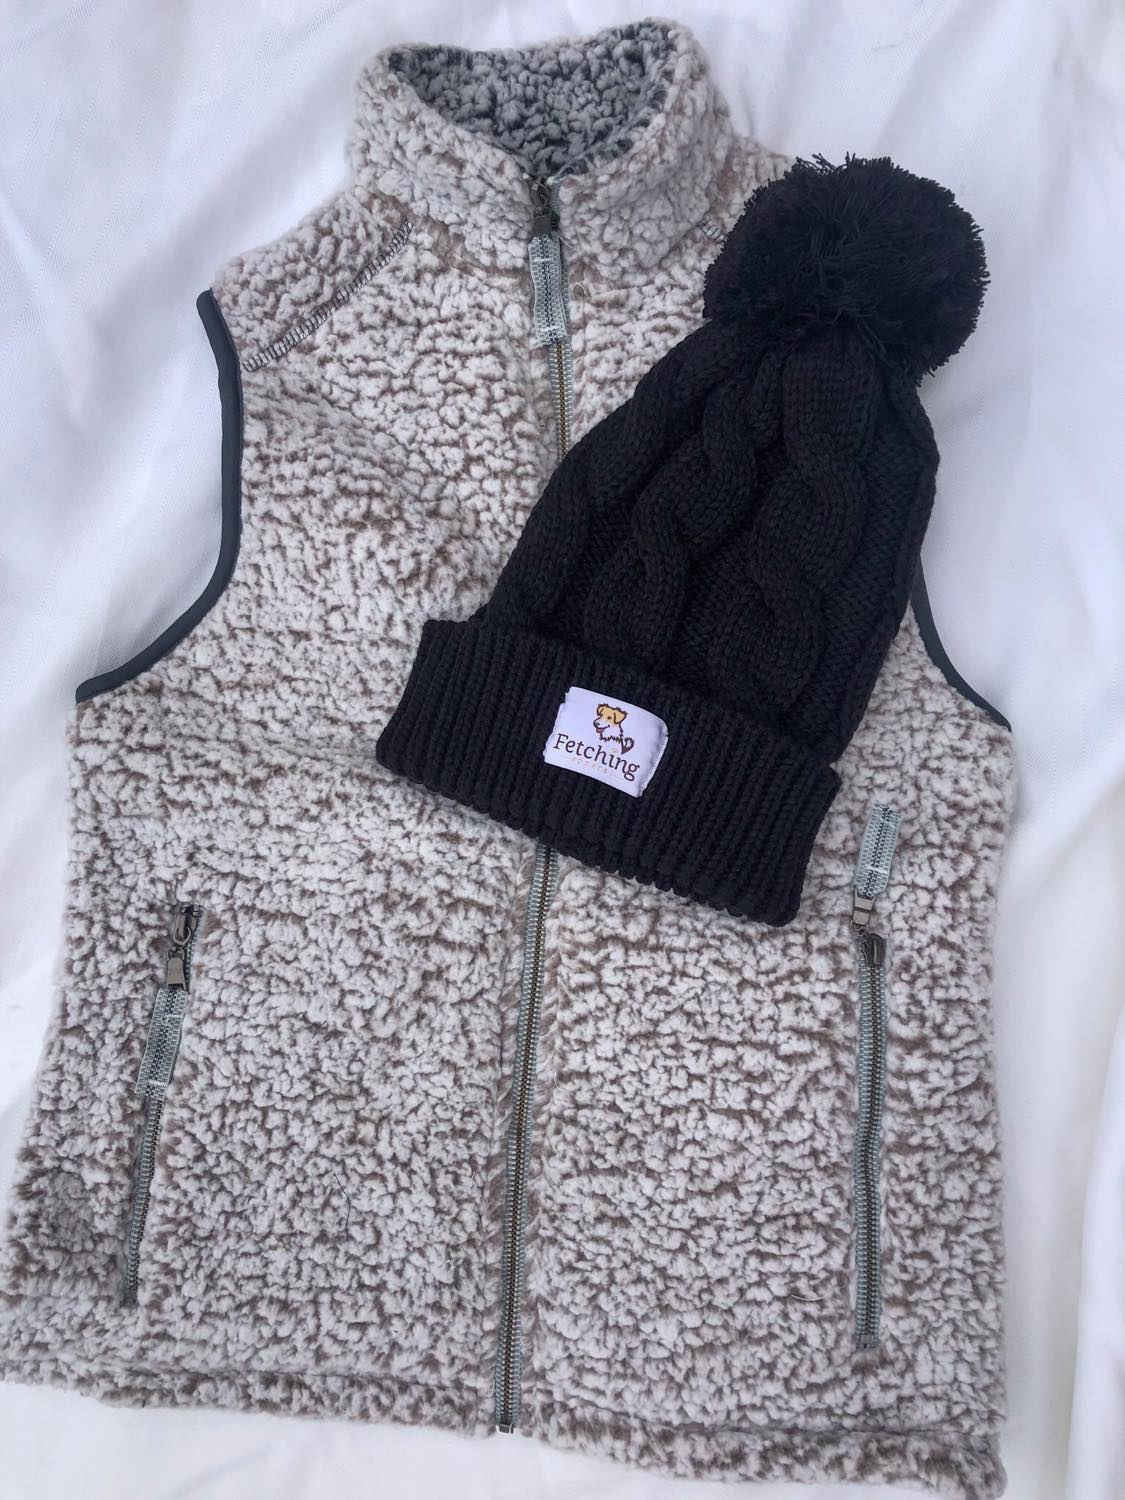 Fetching Apparel Sherpa Vest and Pom Beanie Bundle, 20% of profits donated to animal rescues! Go get it!